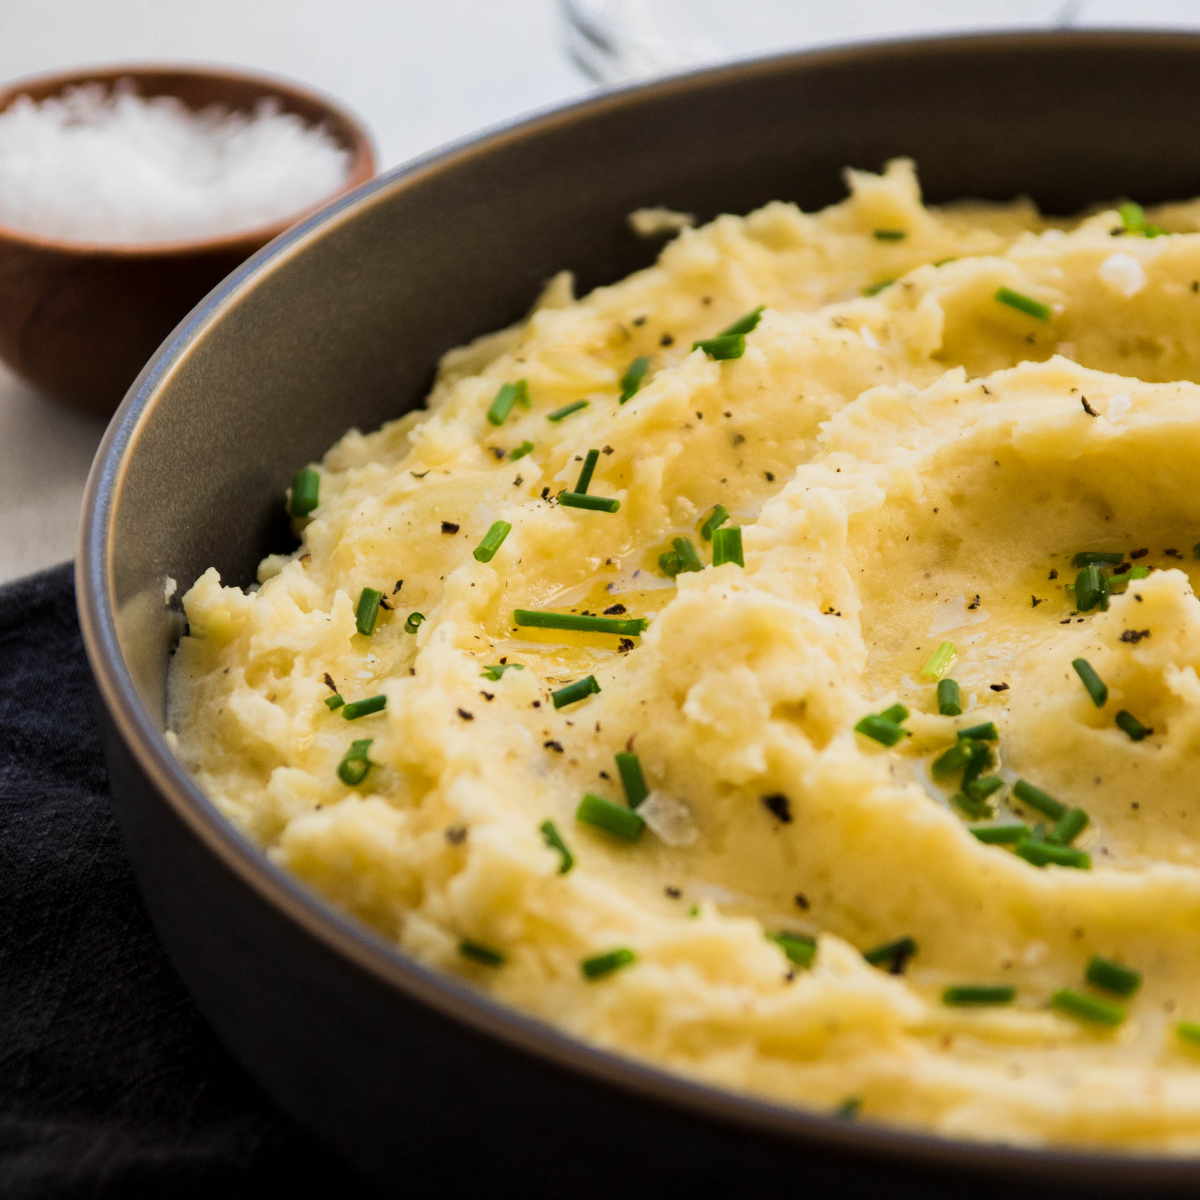 The Ultimate Mashed Potatoes Recipe from https://www.lifeasastrawberry.com/